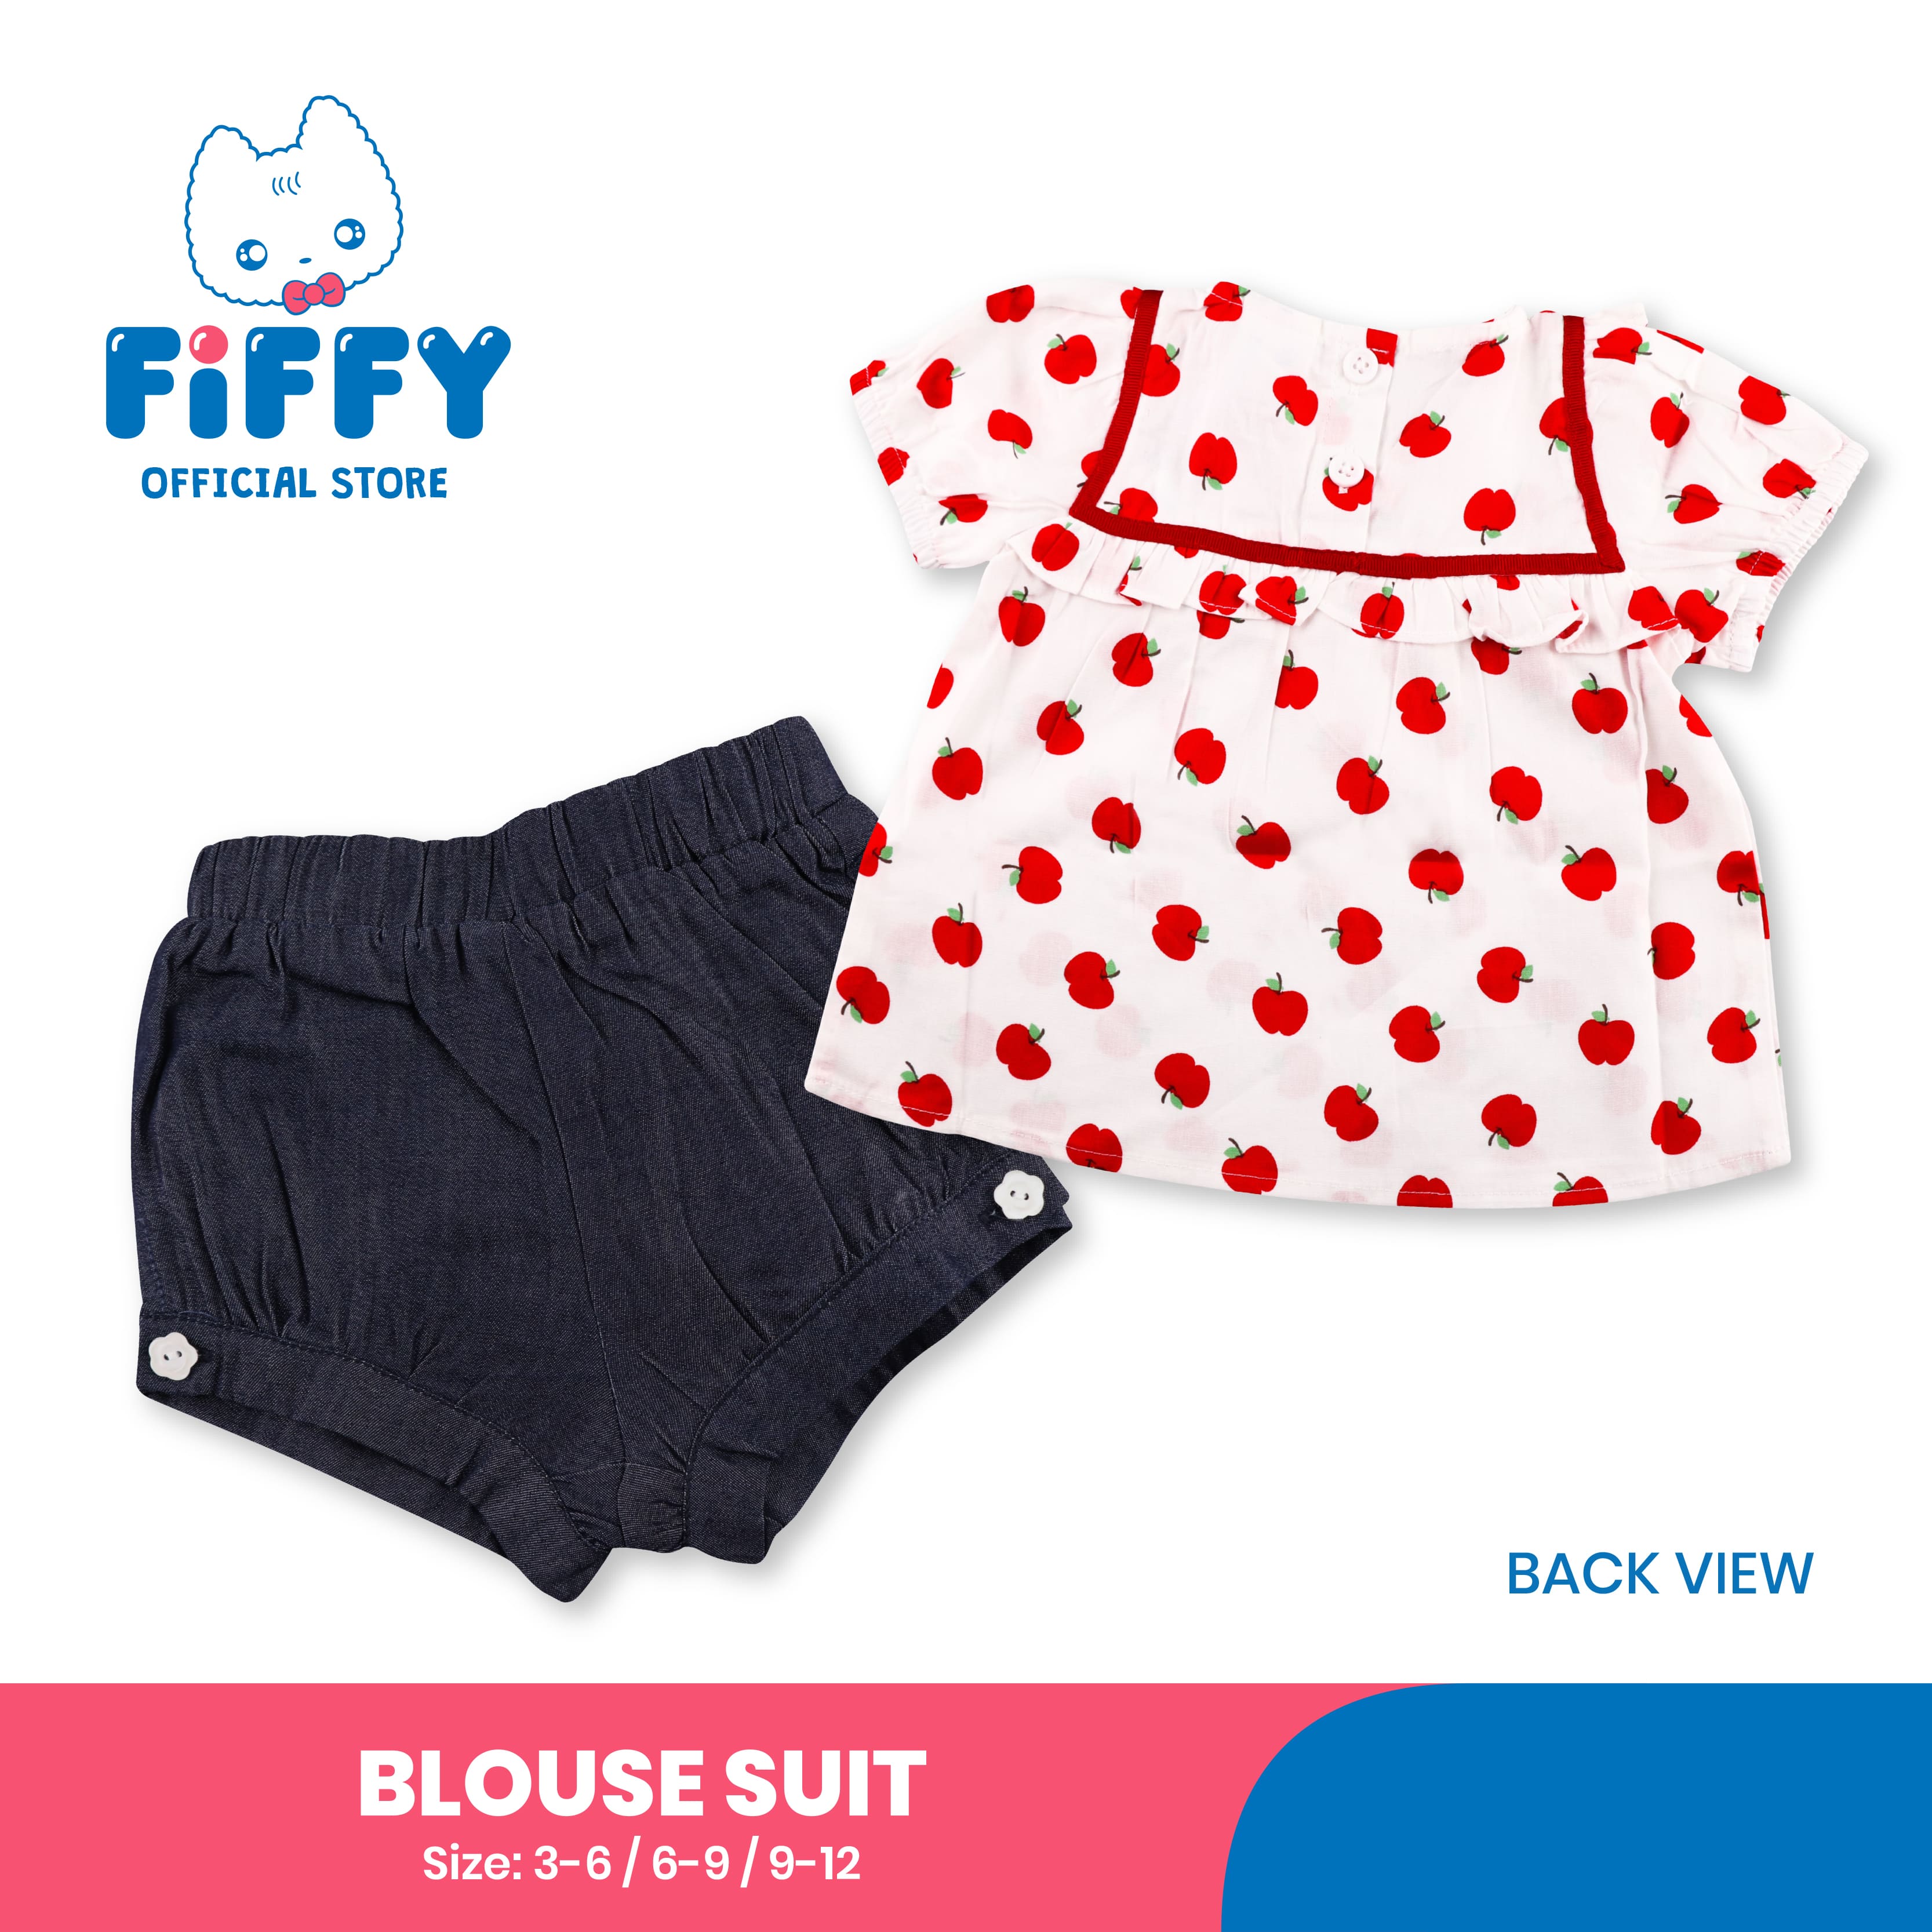 FIFFY HOT DAY BLOUSE SUIT